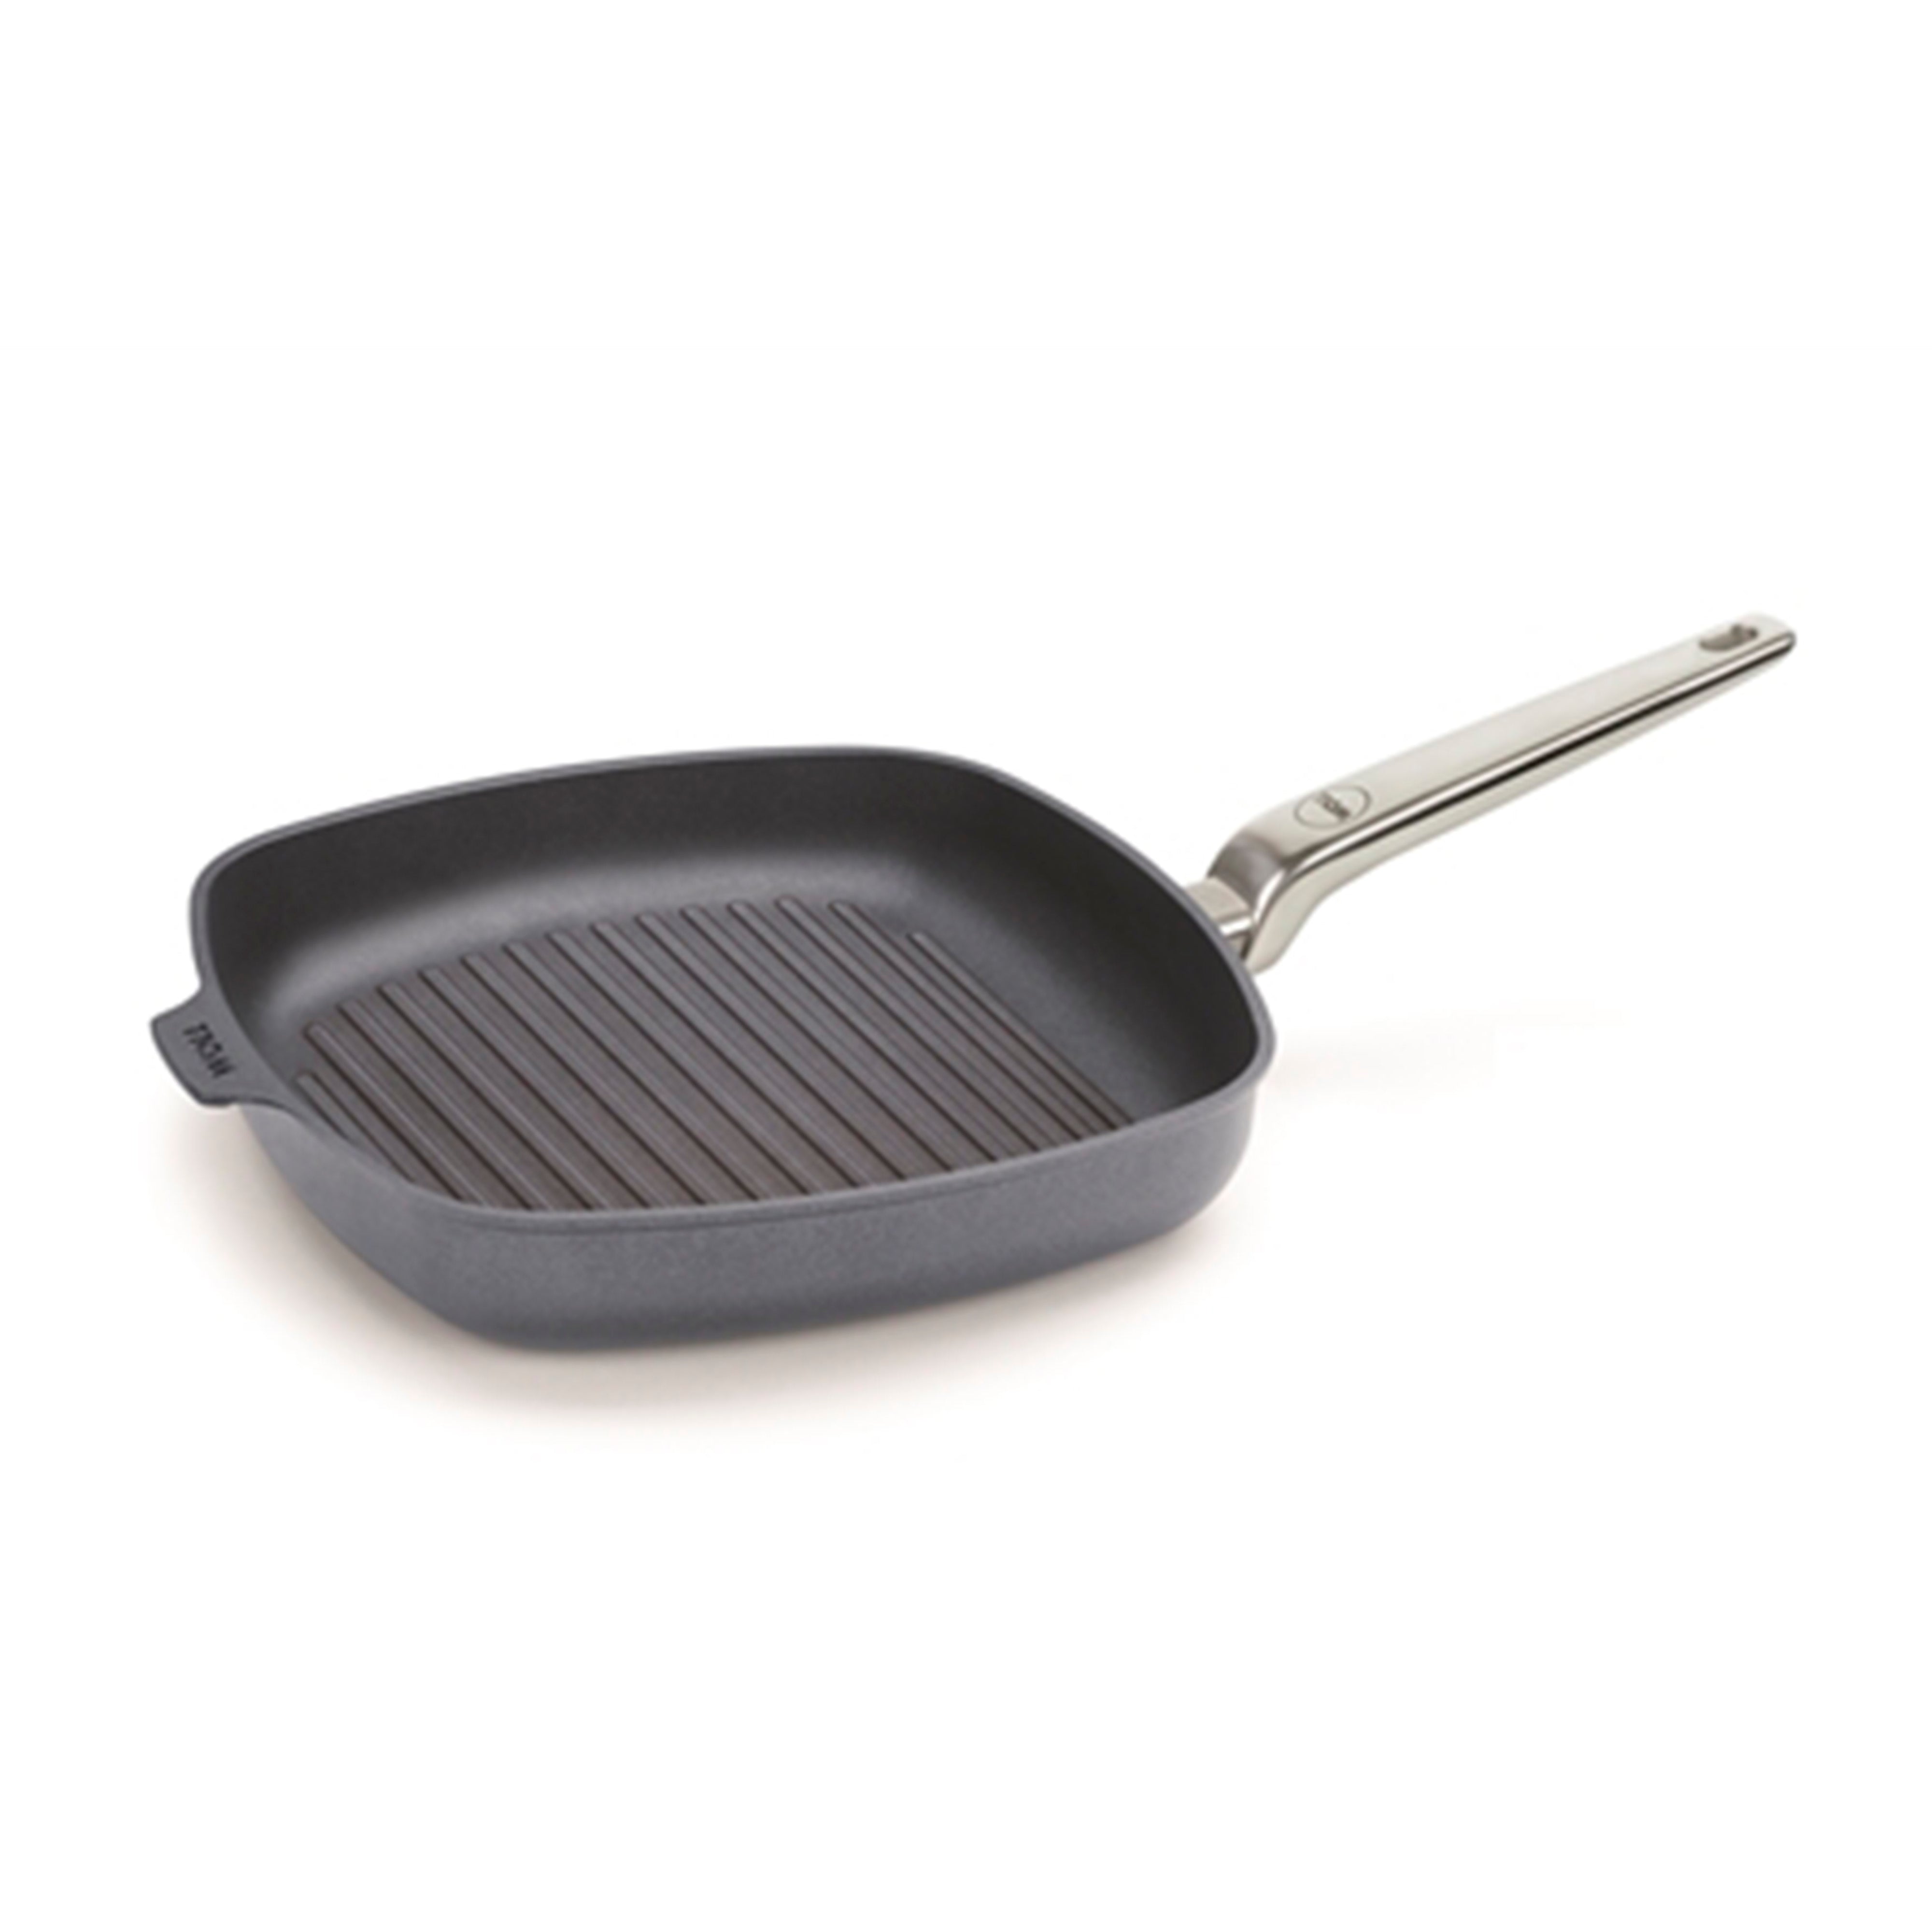 Woll Diamond lite Pan - Made in Germany. Came with a spatula